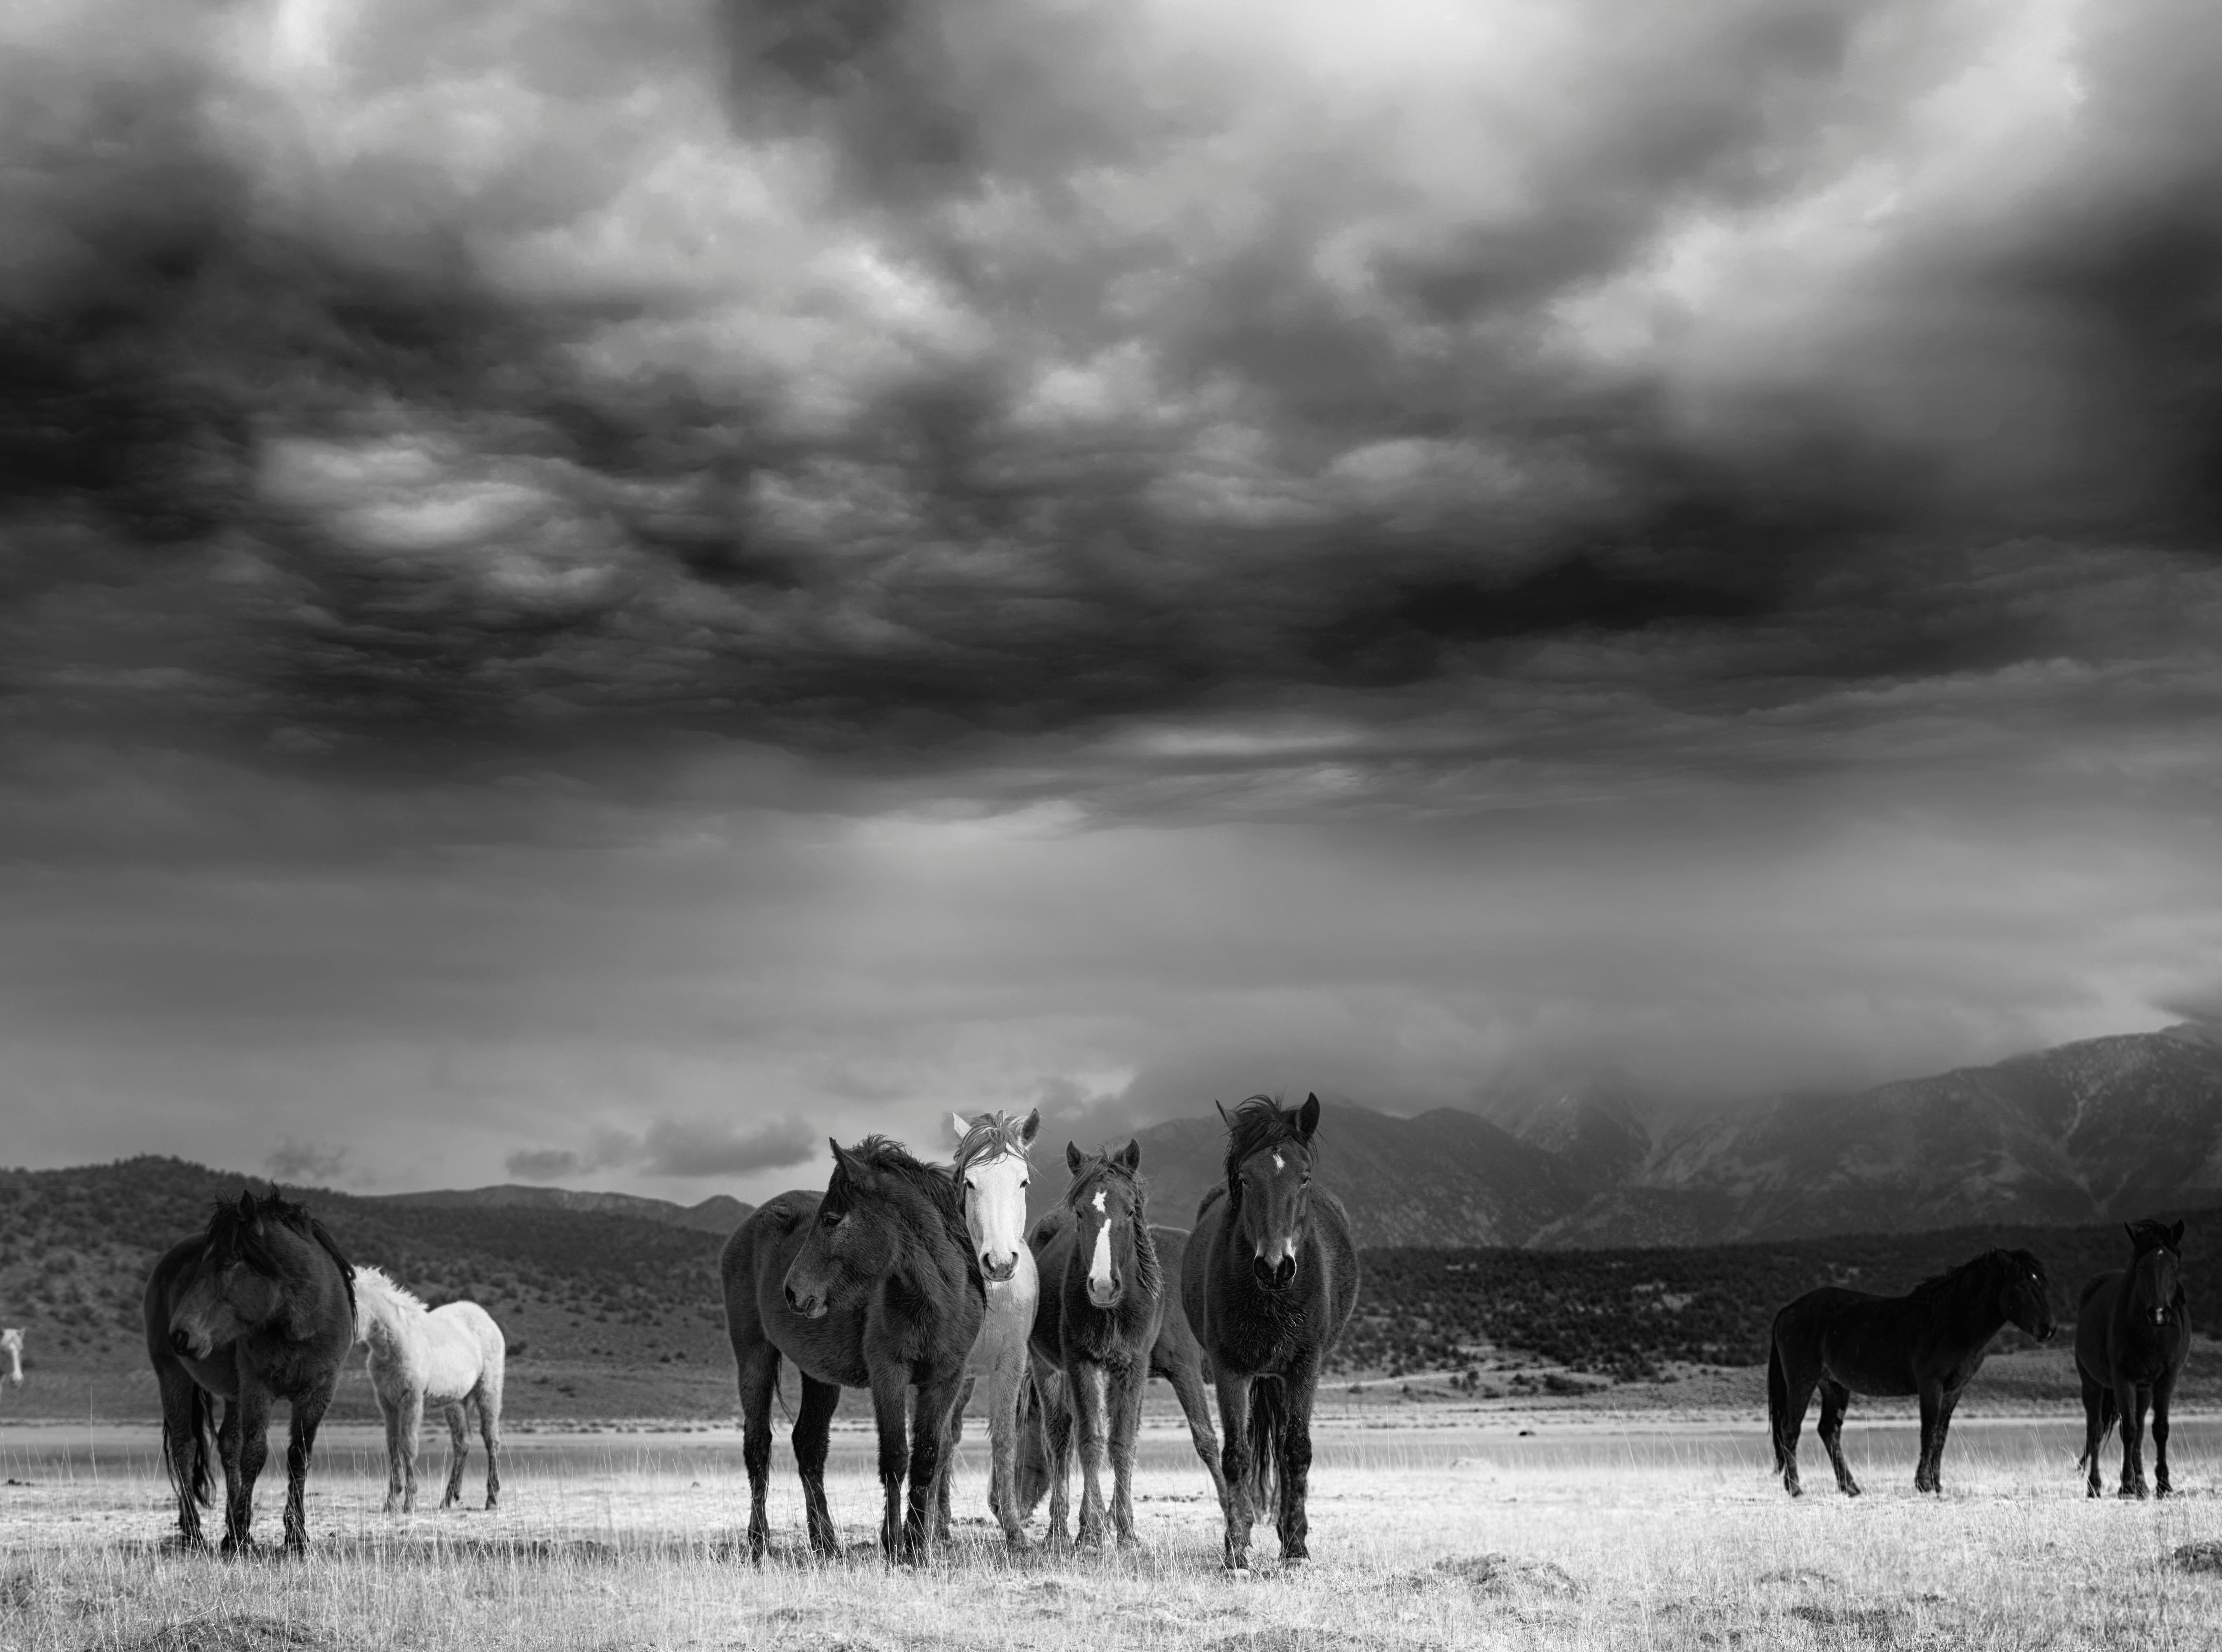 Shane Russeck Animal Print - "The Calm" 36x48  - Photography of Wild Horses Unsigned Test Print